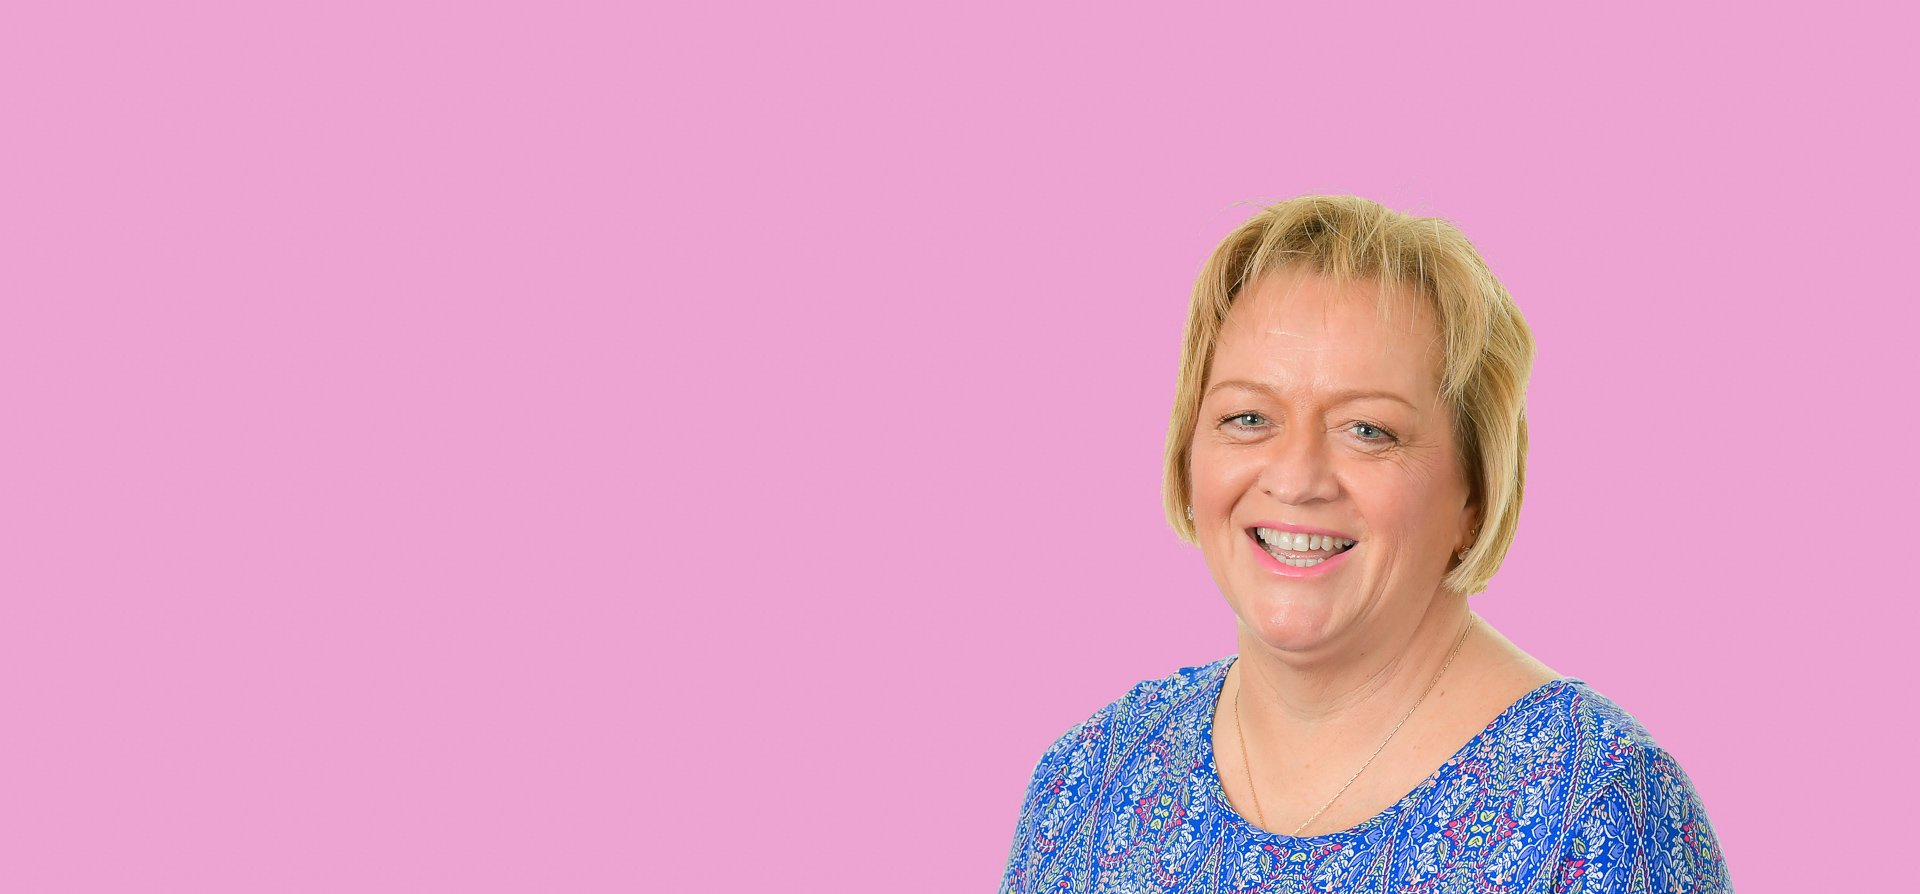 a woman in a blue shirt is smiling on a pink background .